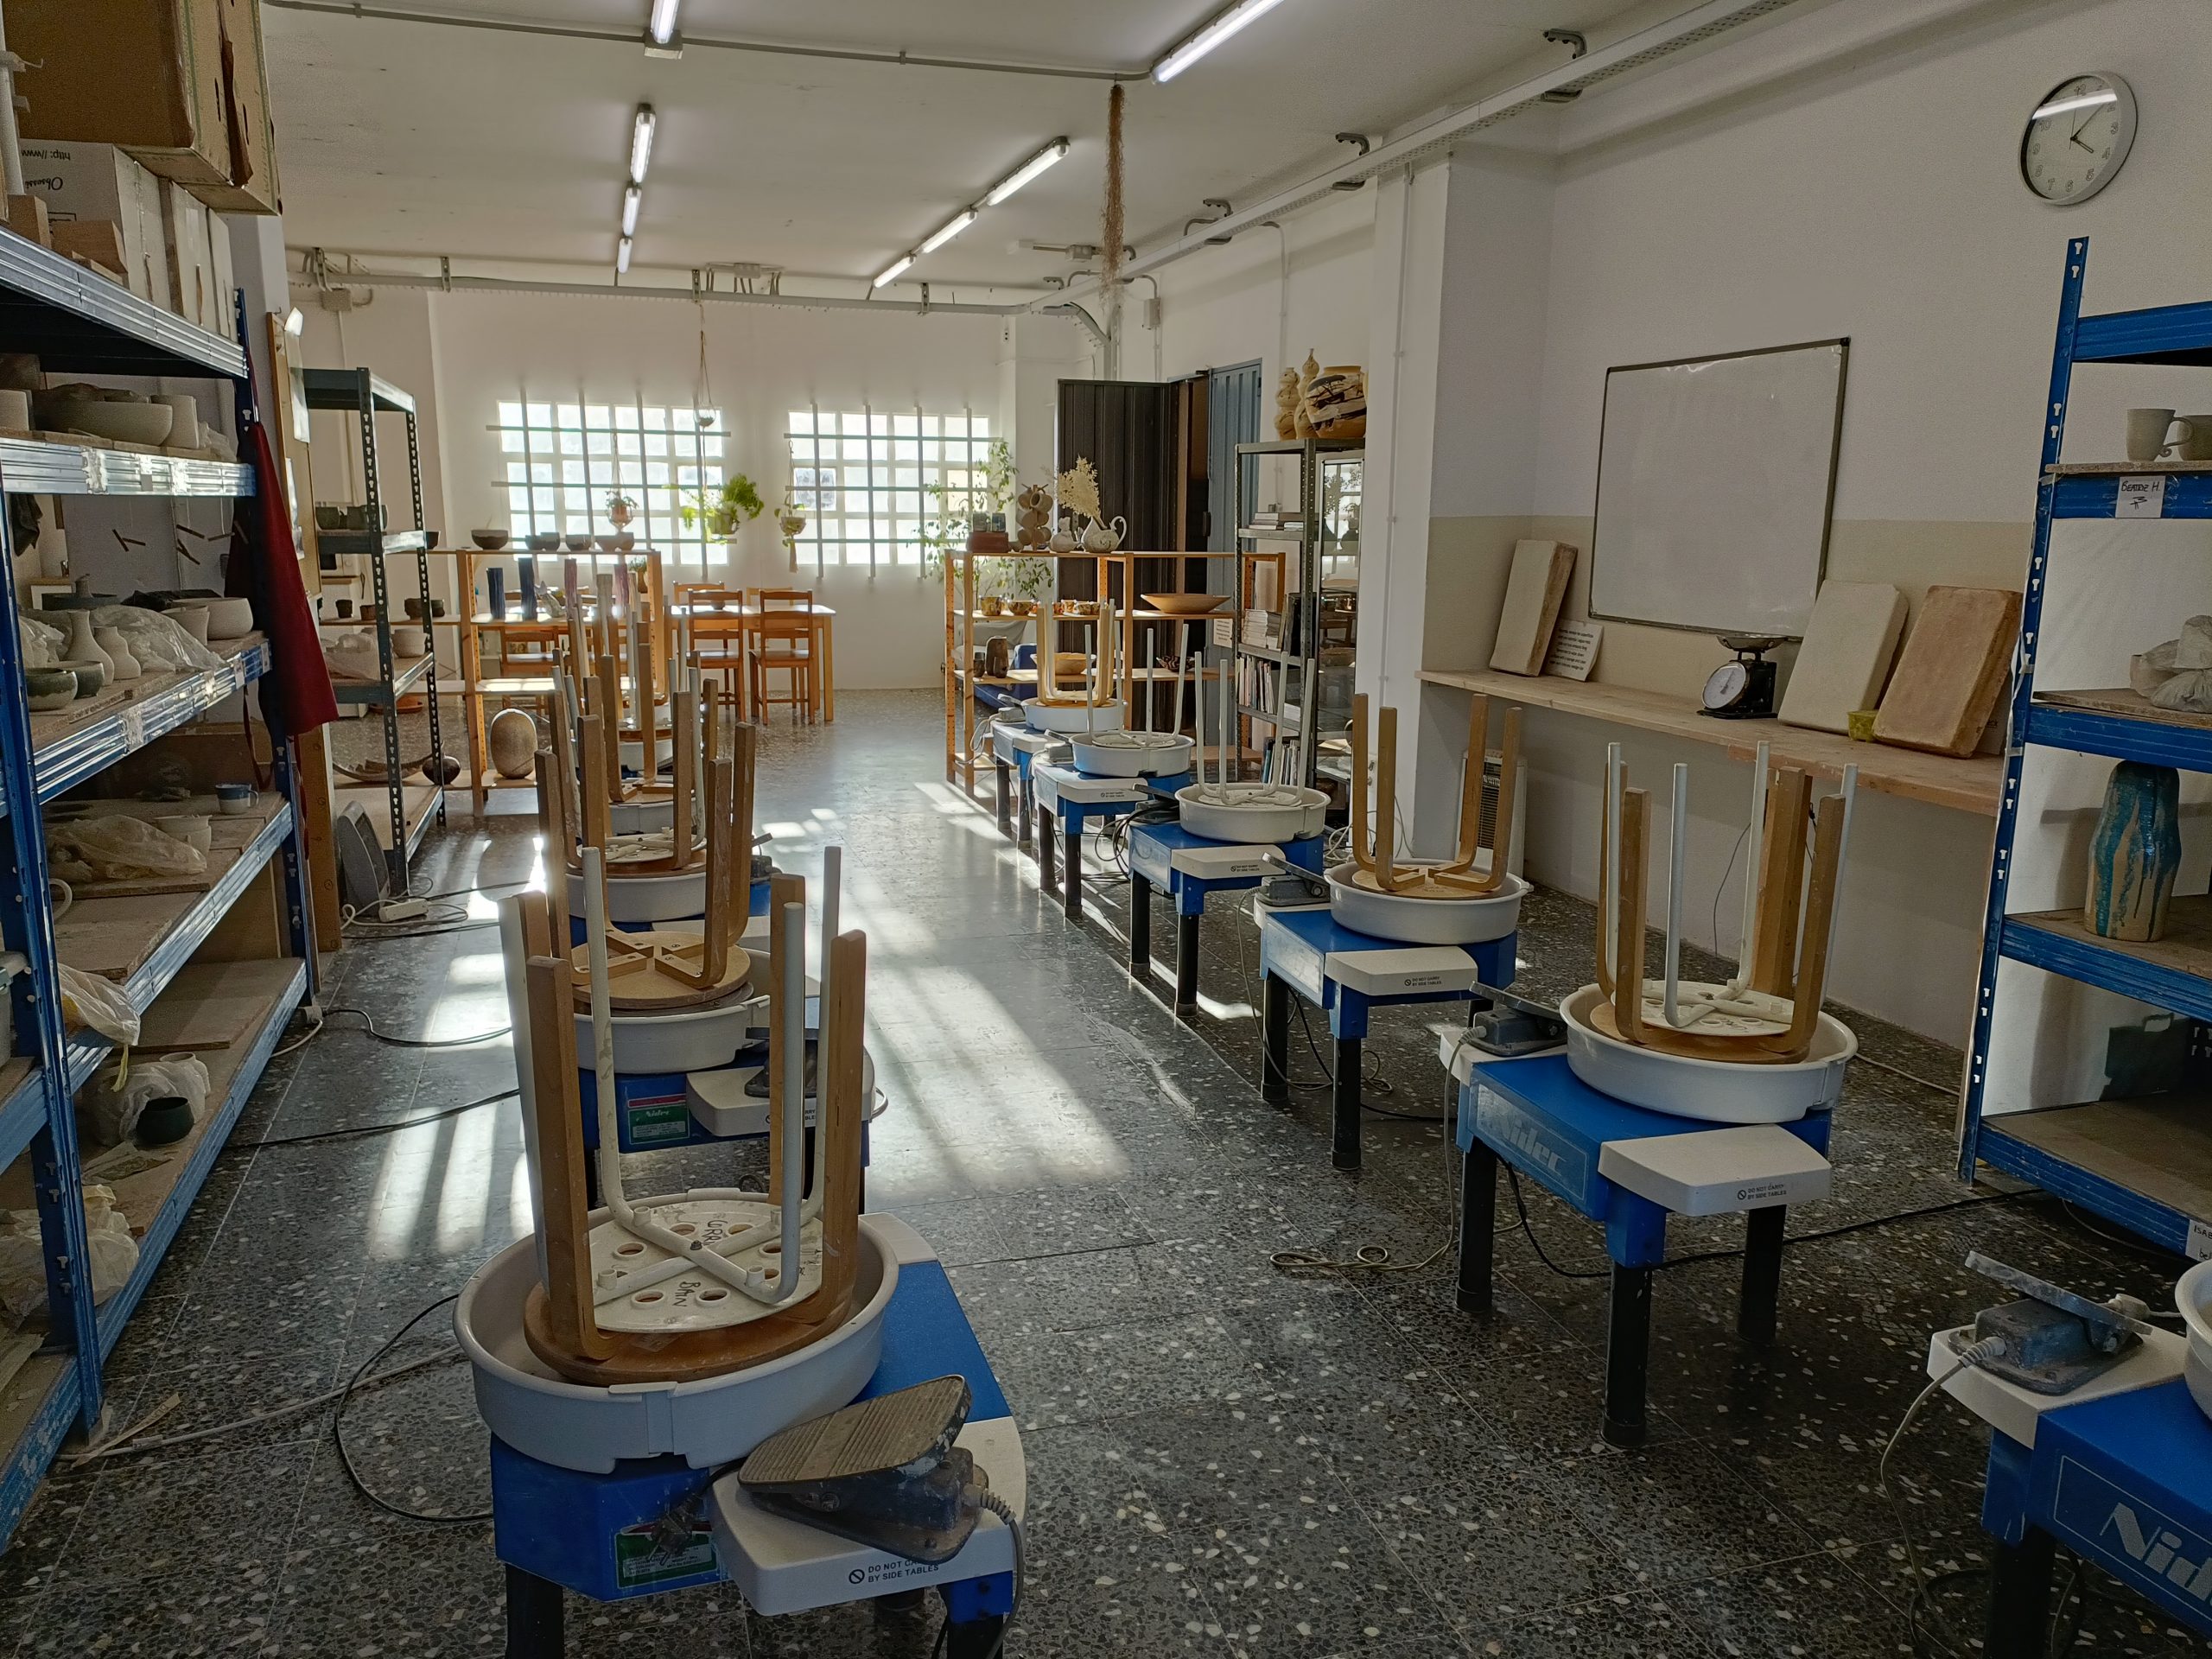 Eight Shimpo throwing wheels in the teaching area at Corrie Bain International Ceramic school.